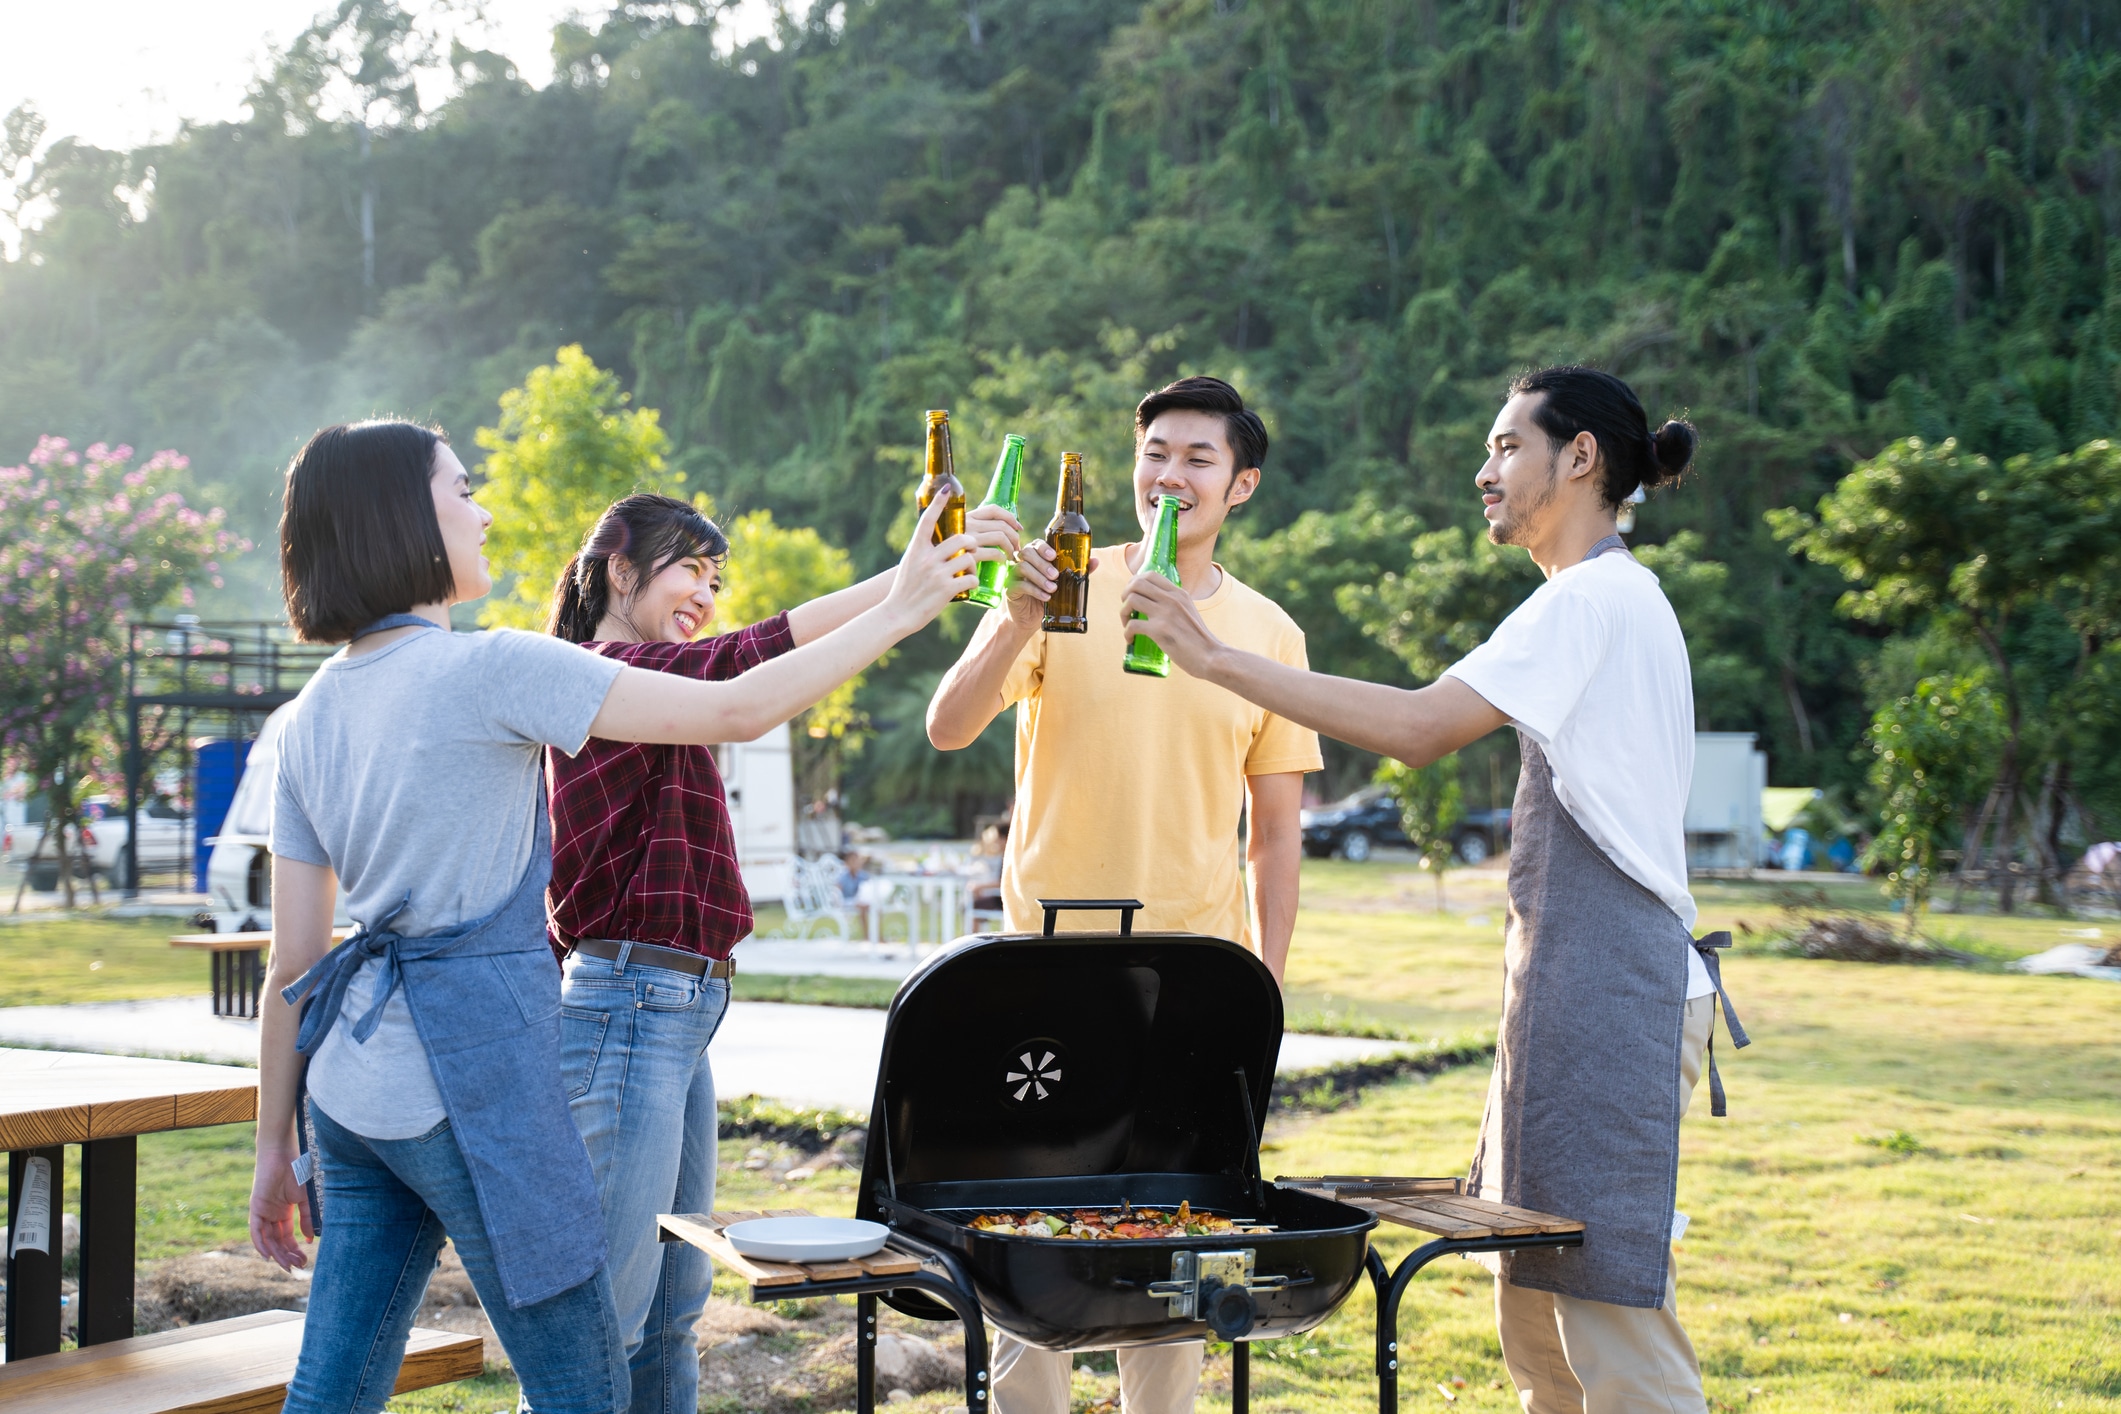 Two couples toast beers during outdoor barbecue.